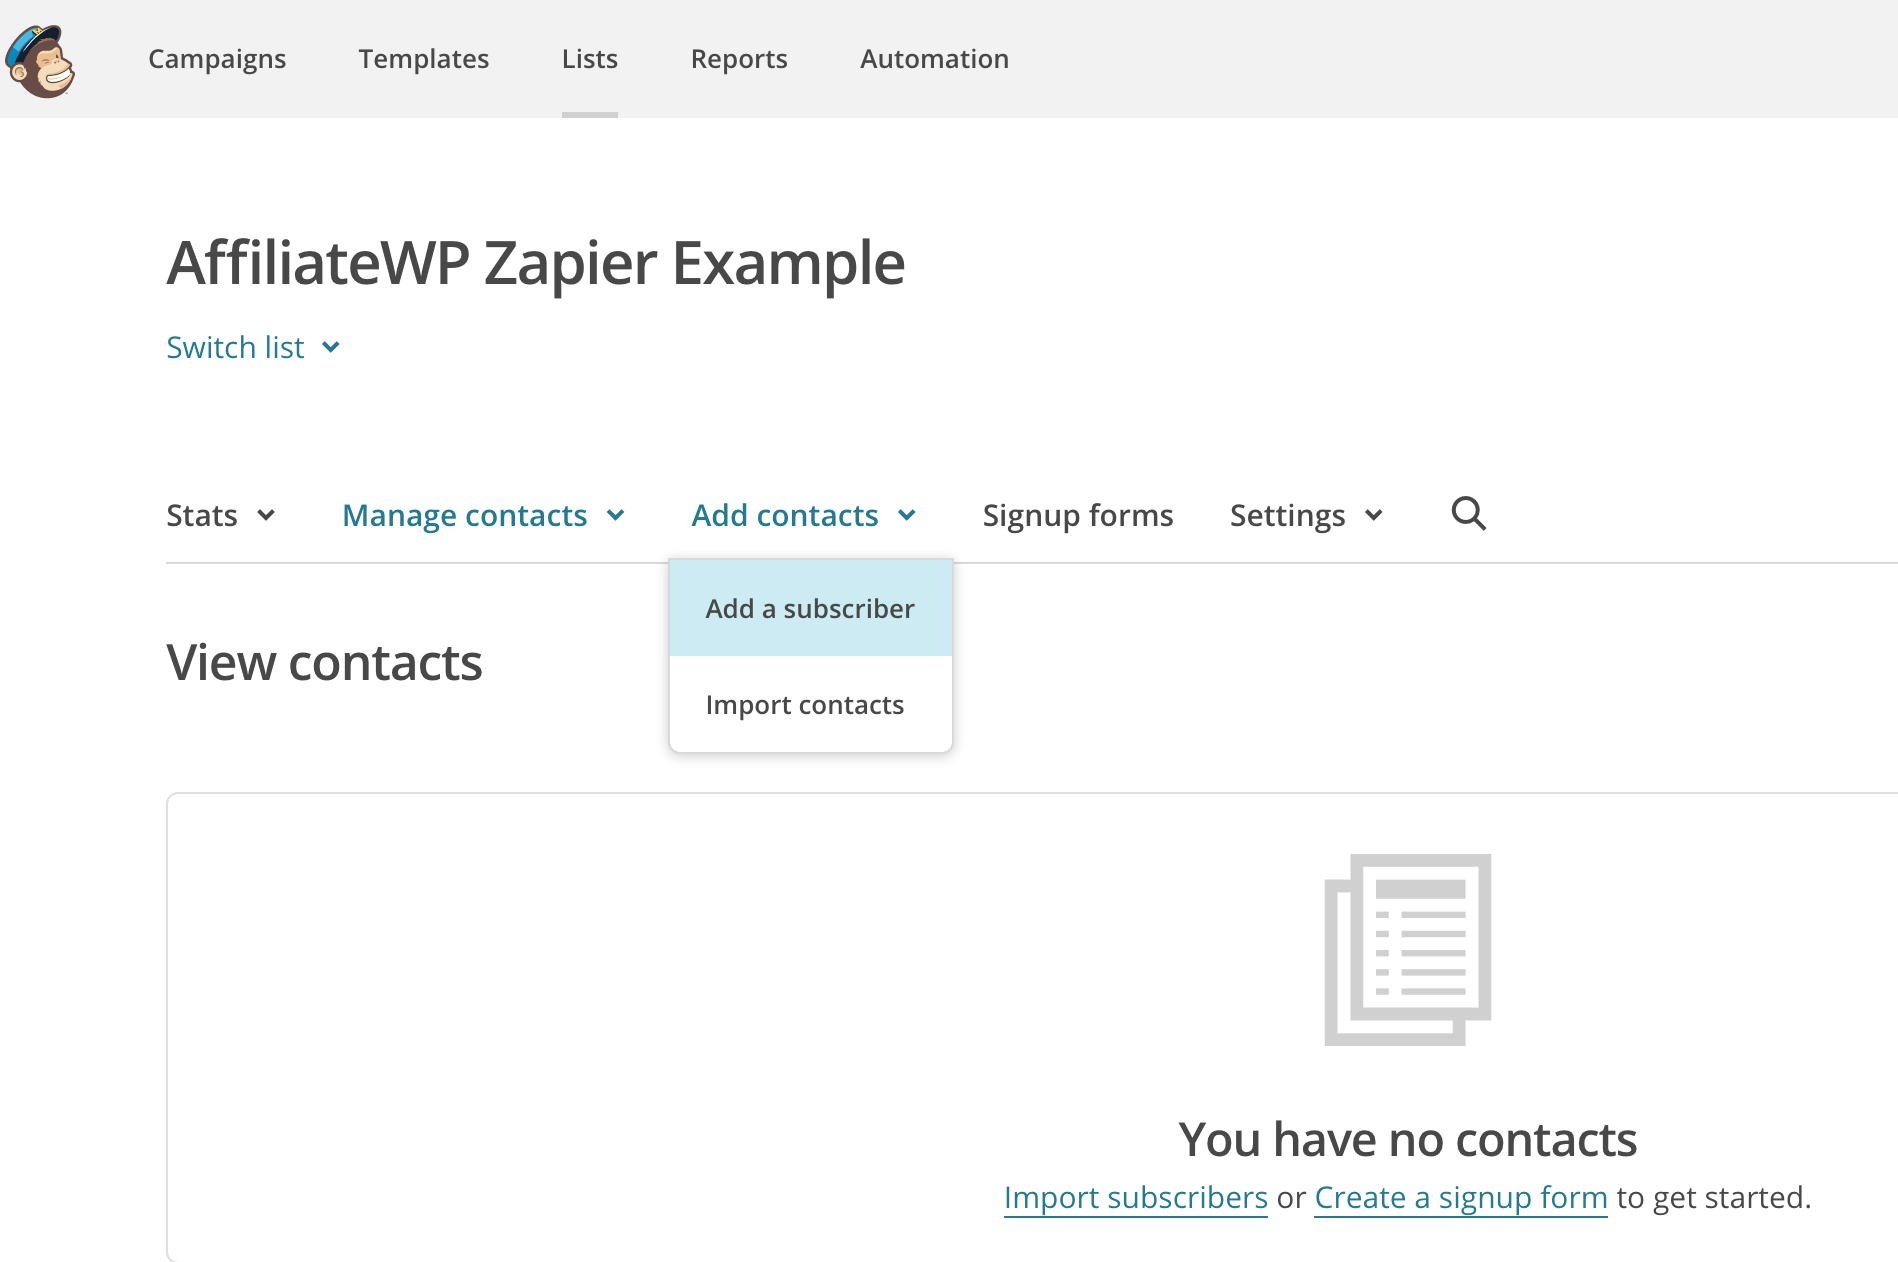 Importing a single subscriber in Mailchimp while creating a zap for use with AffiliateWP Zapier.